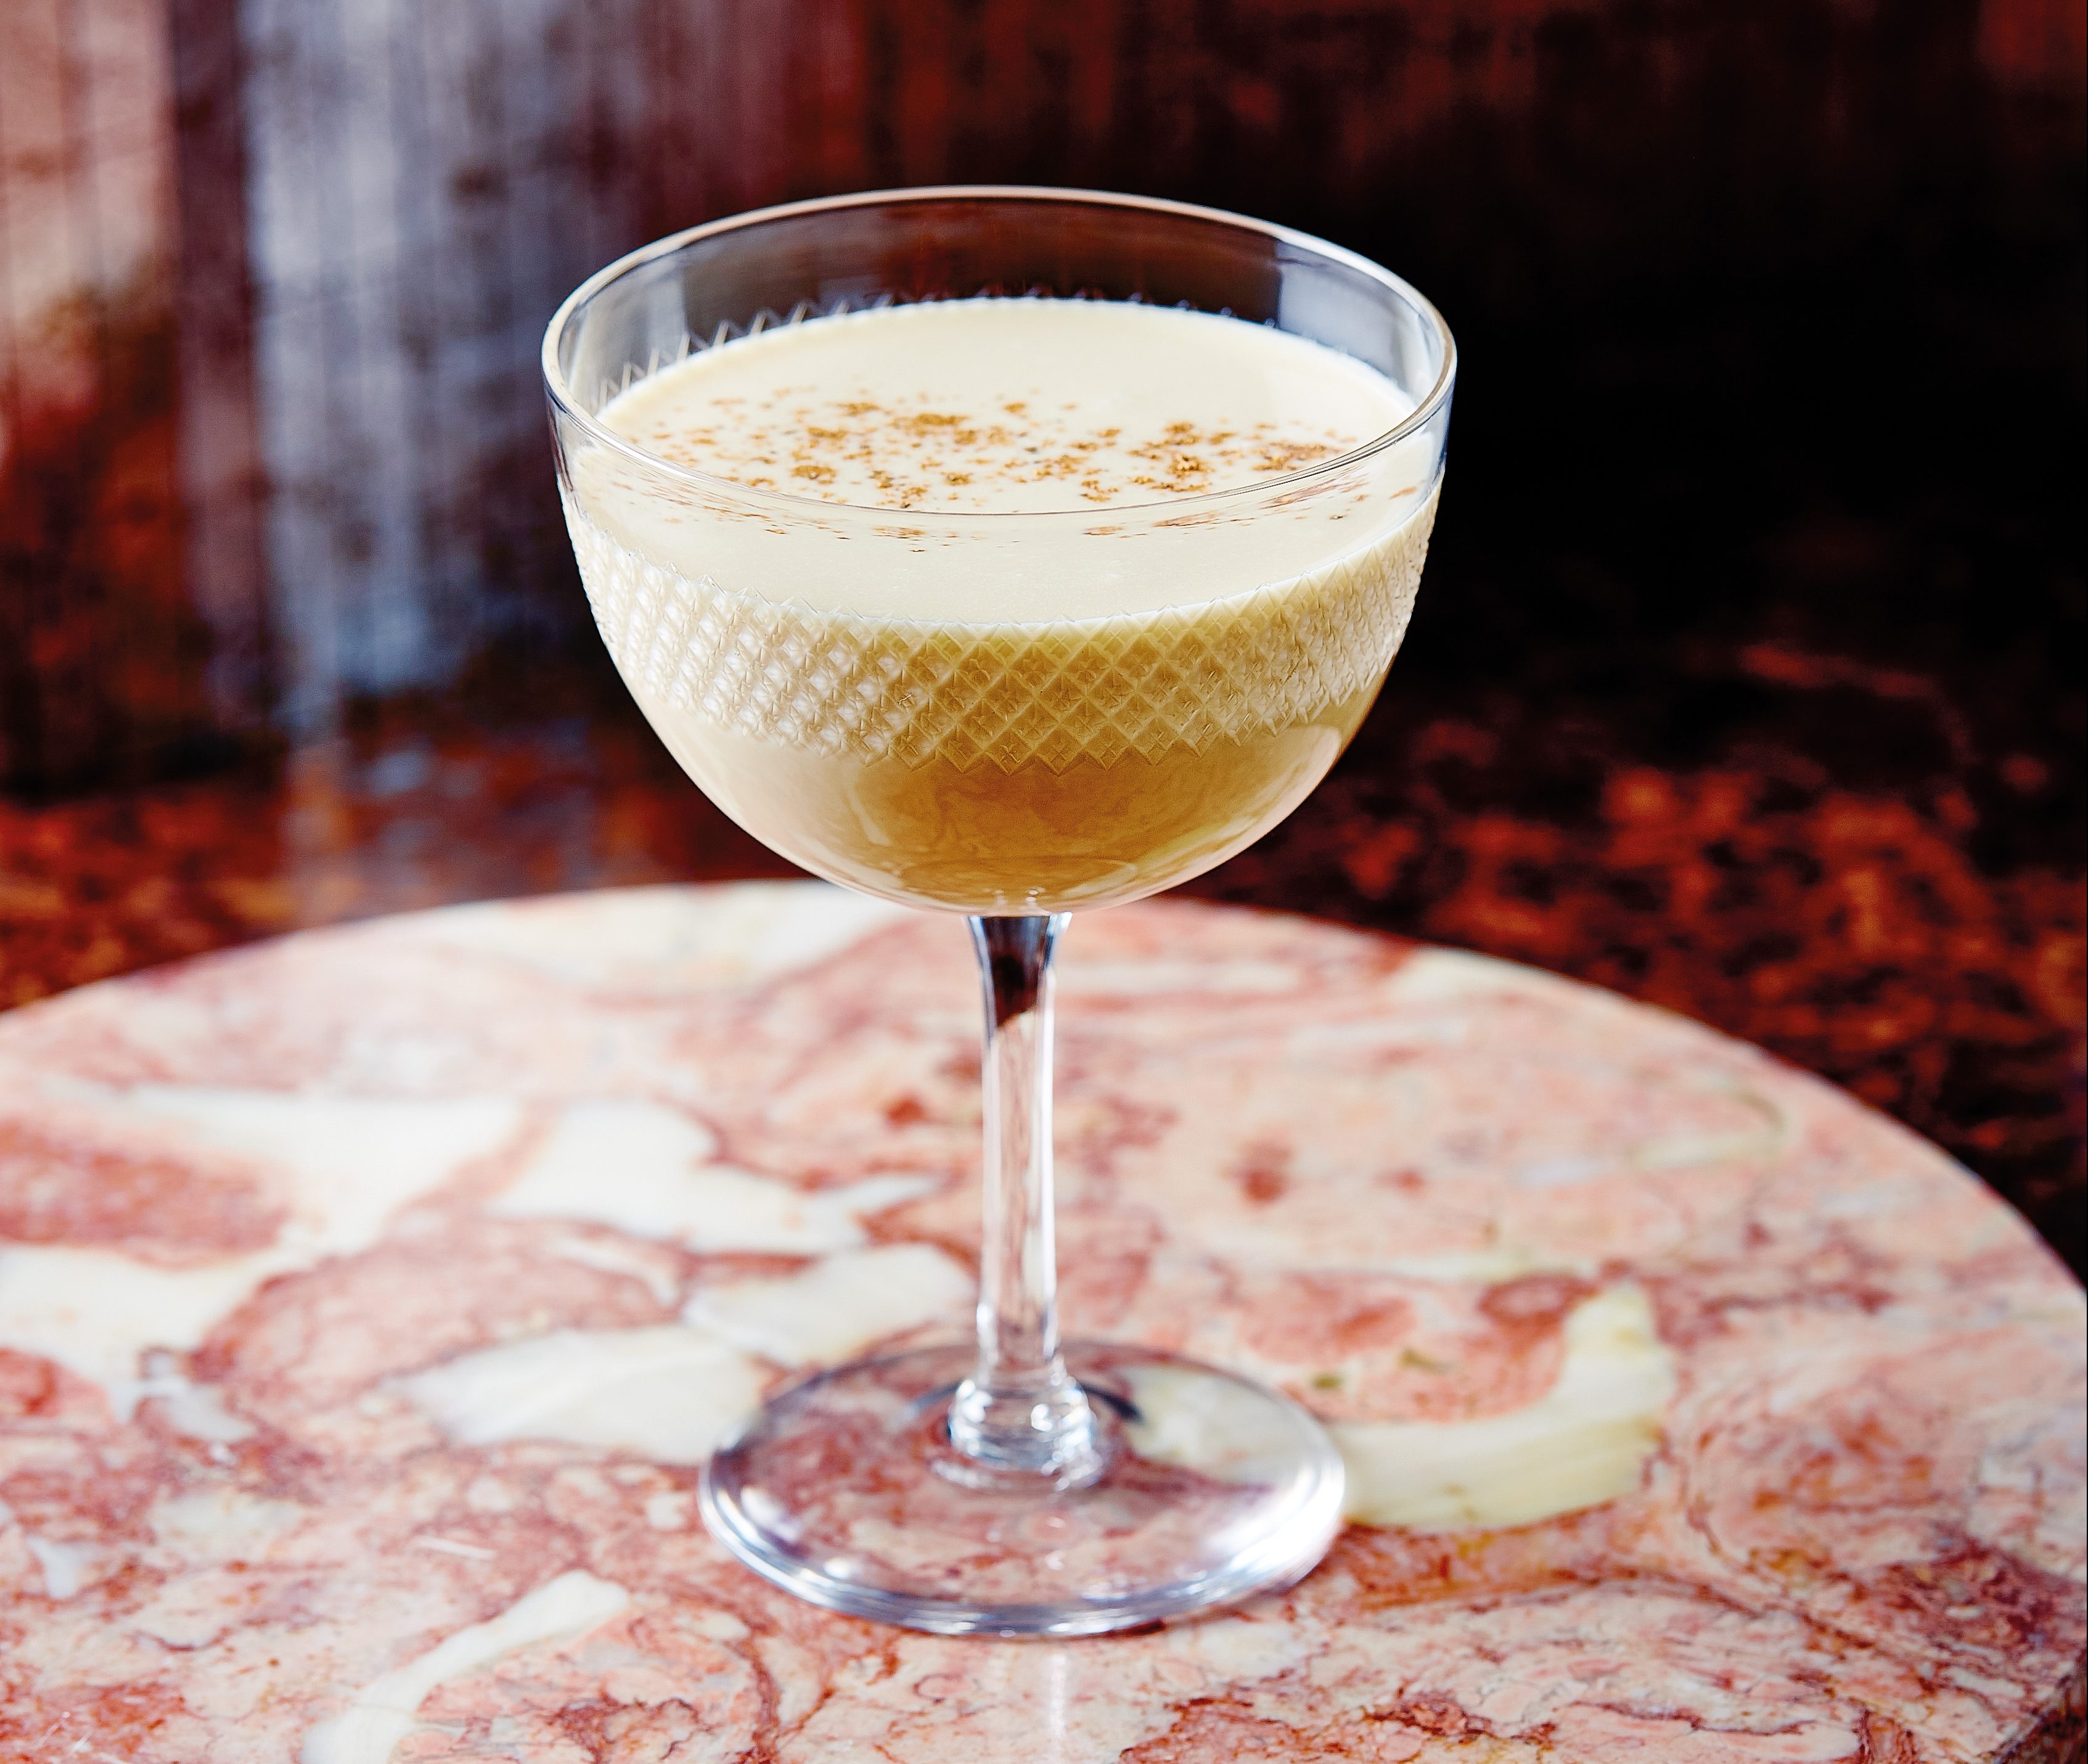 A Brandy Alexander pictured in David T. Smith and Keli Rivers' new book Dessert Cocktails. Credit Alex Luck